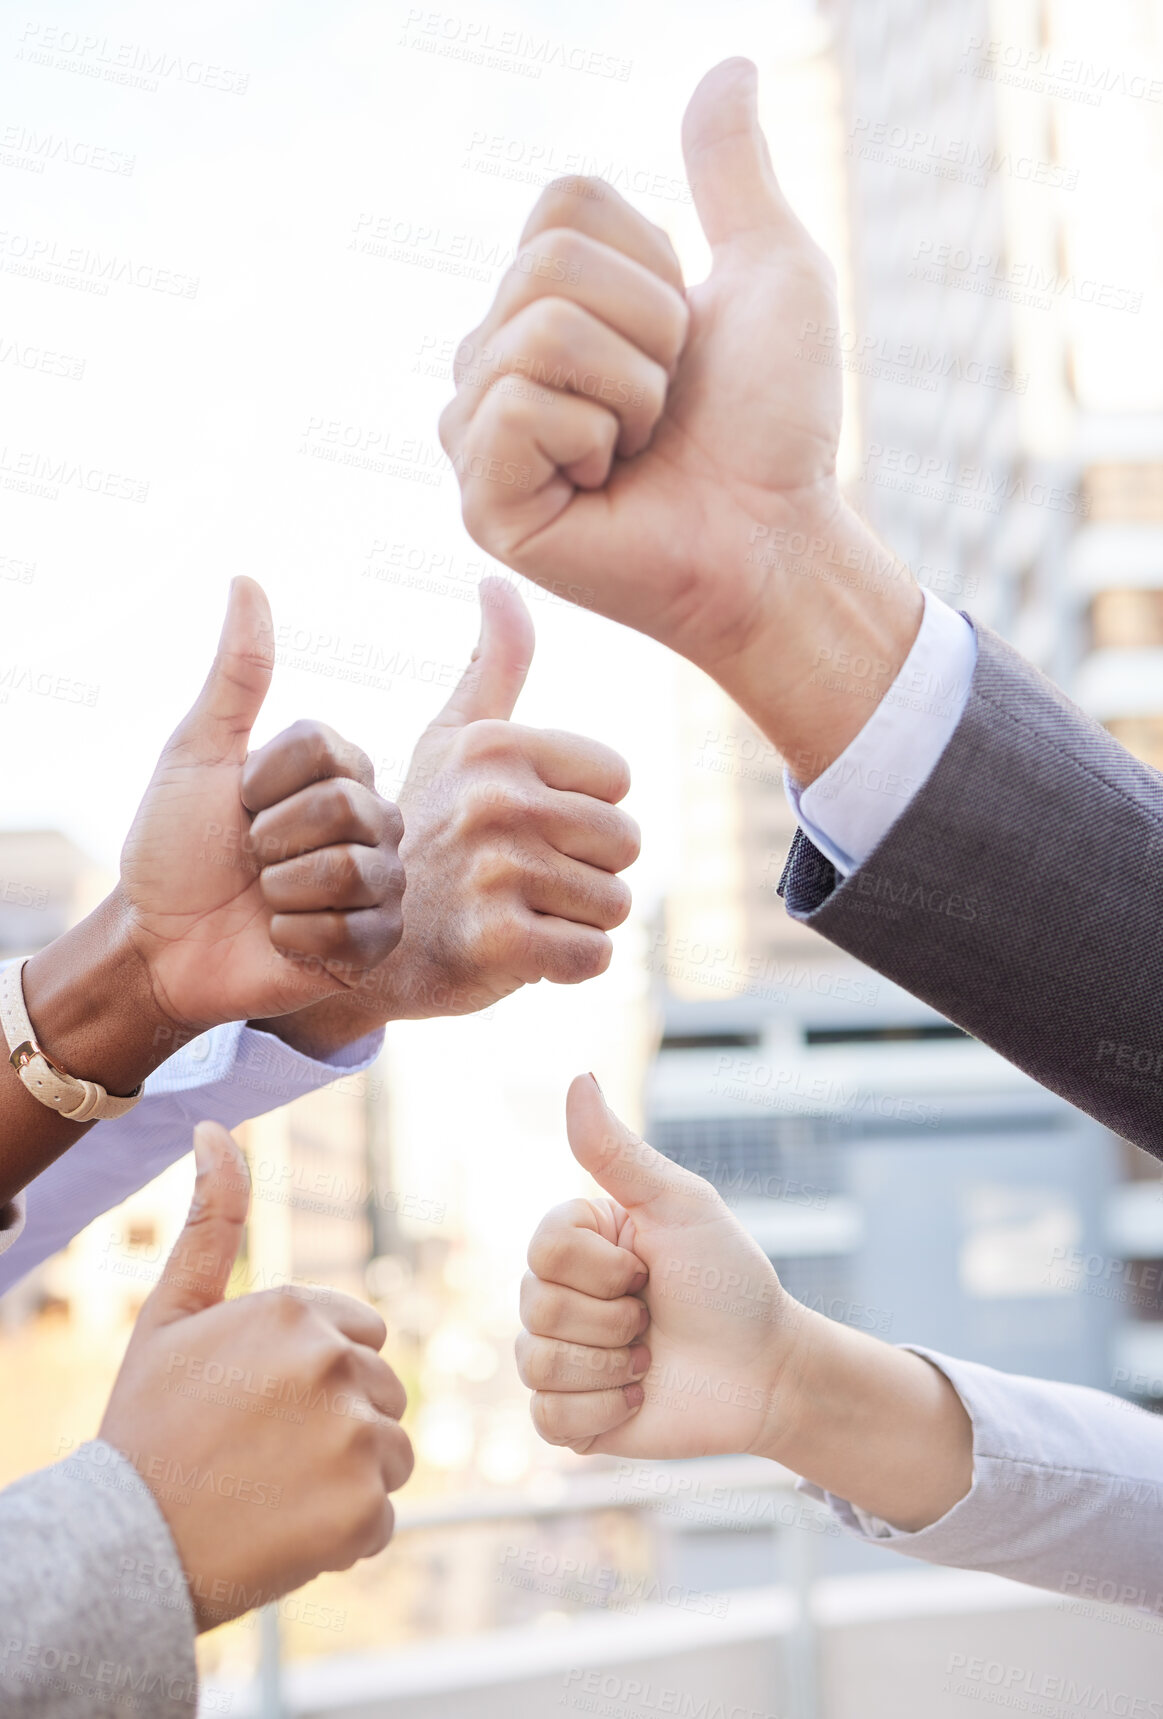 Buy stock photo Cropped shot of an unrecognisable group of businesspeople standing together outside and showing a thumbs up